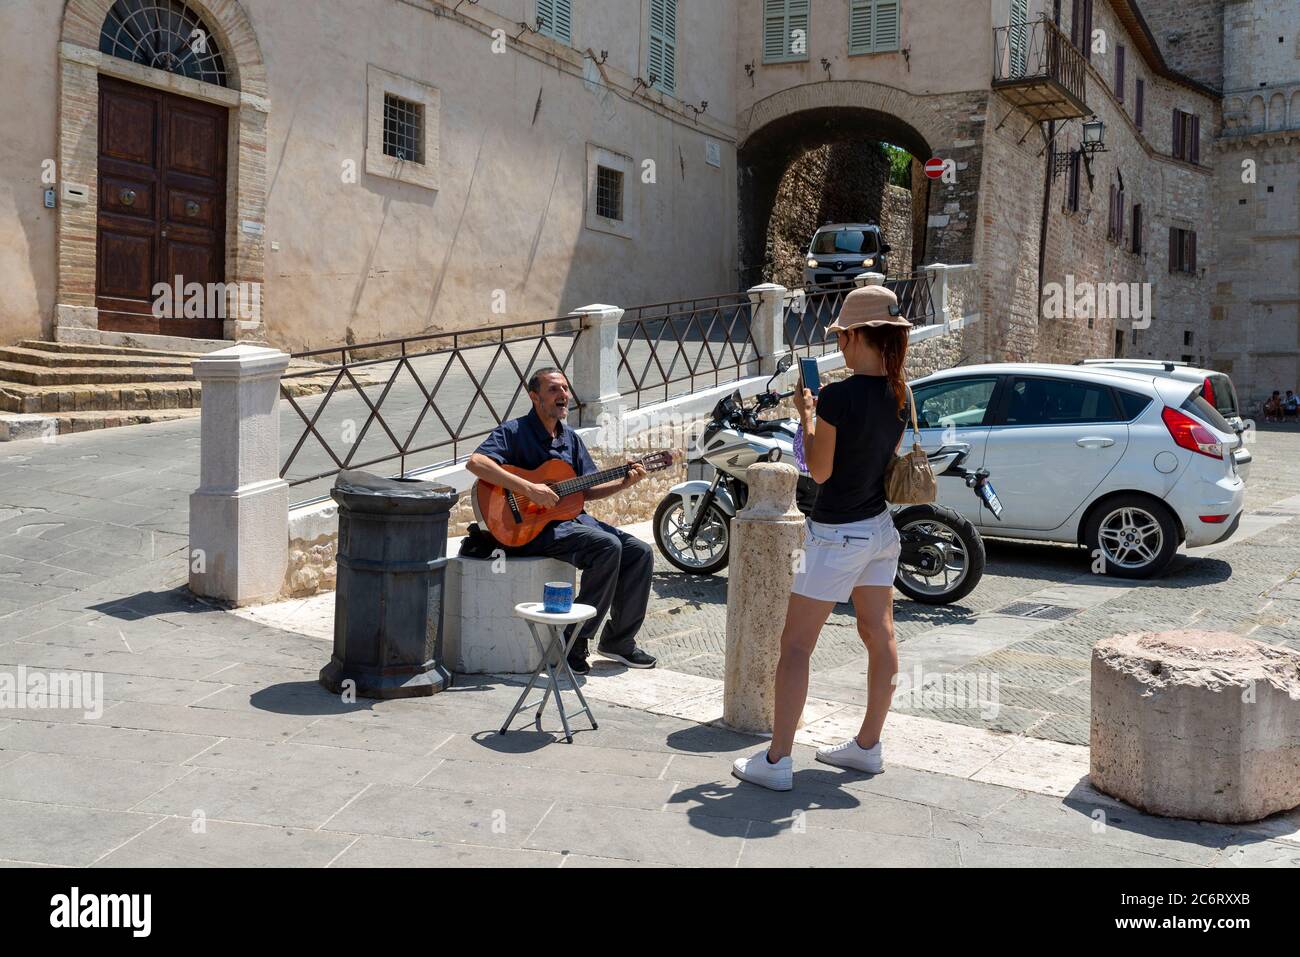 assisi,italy july 11 2020:a street artist with a guitar in the sun Stock Photo